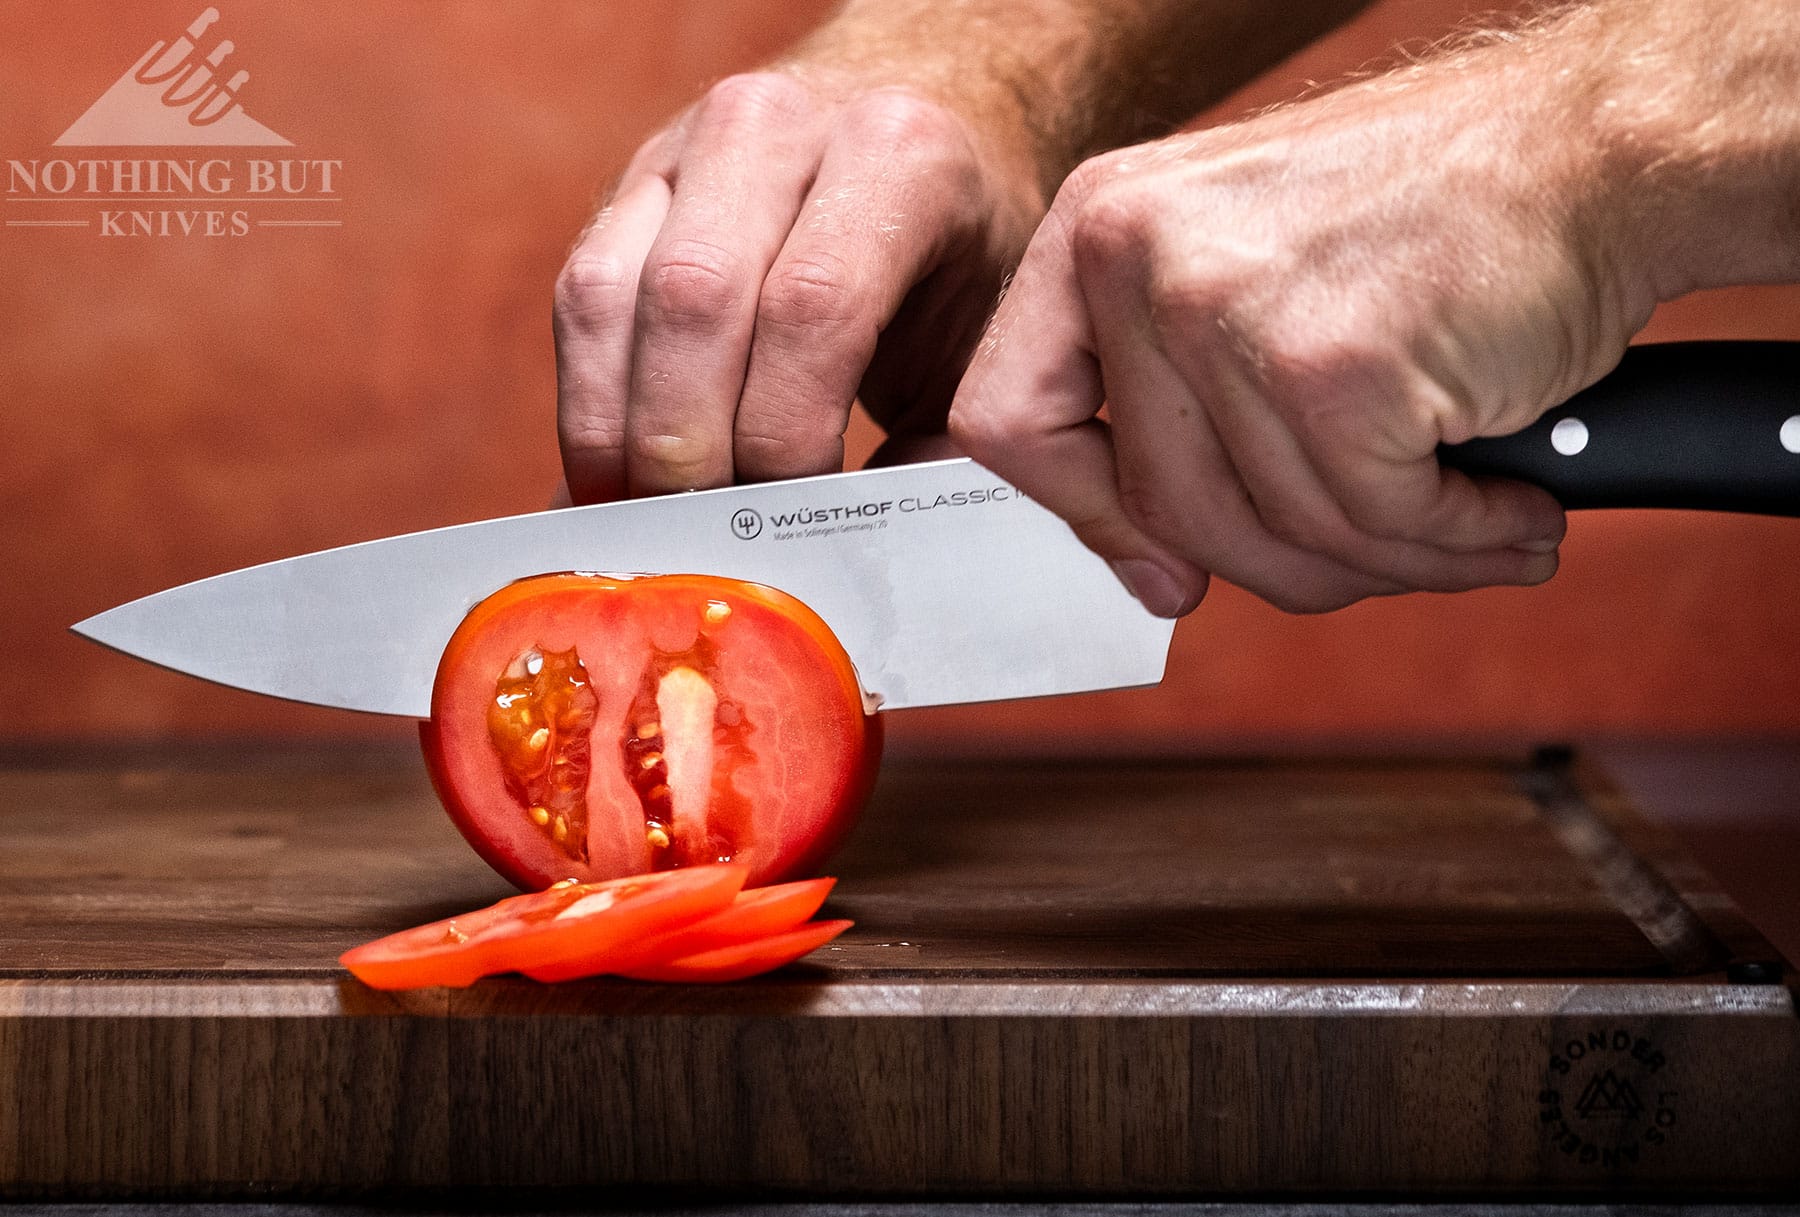 The 8-inch Wusthof Classic Ikon chef knife slicing through a tomato. 